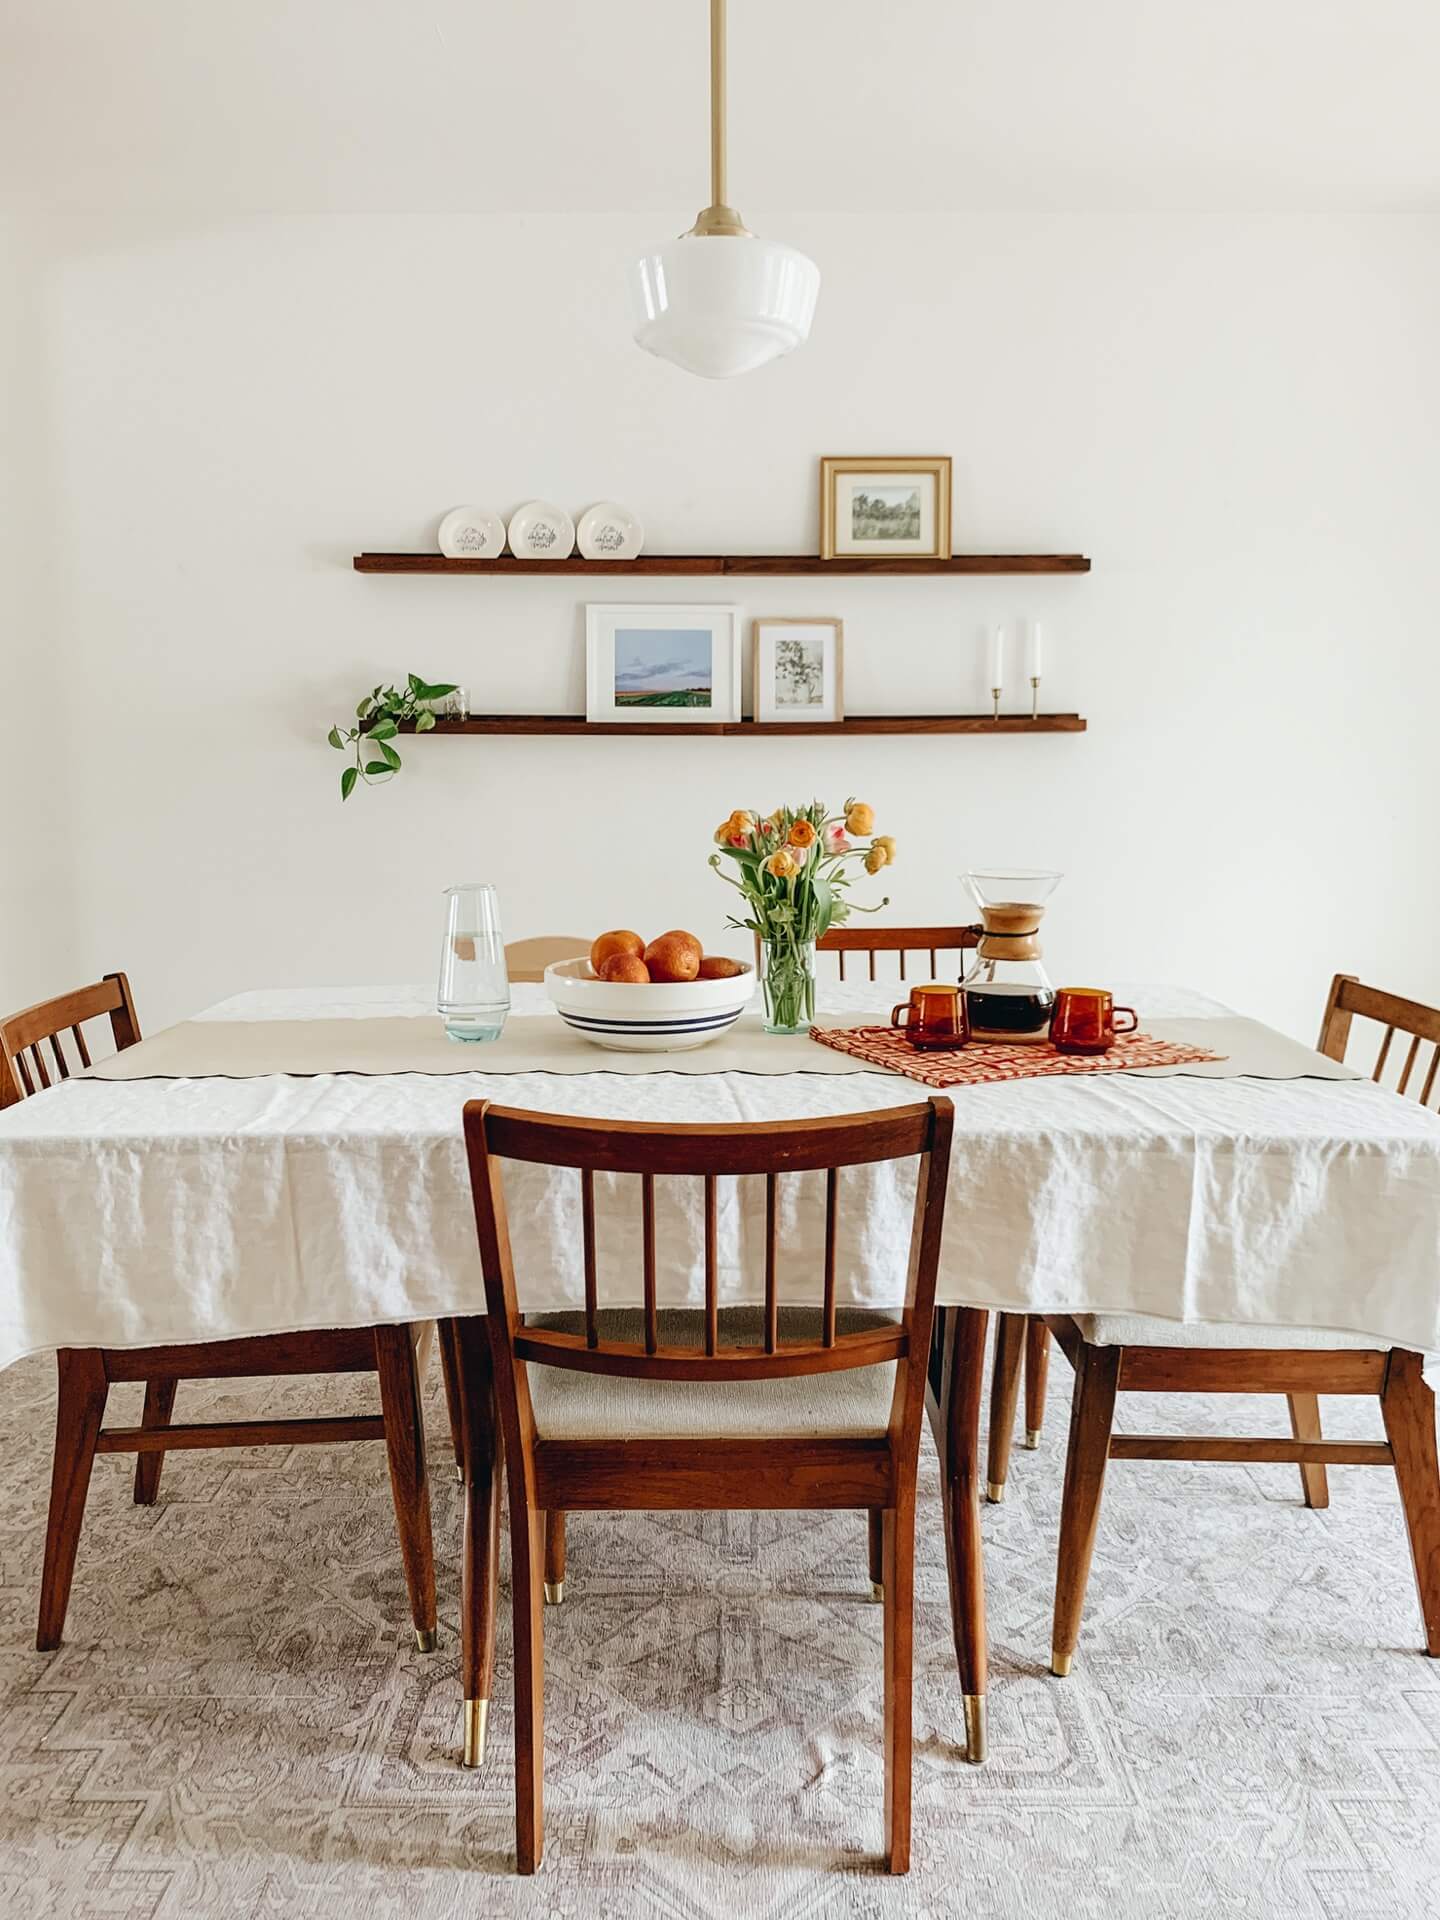 Home tour with Leah Gaeddert - dining table with wooden chairs 